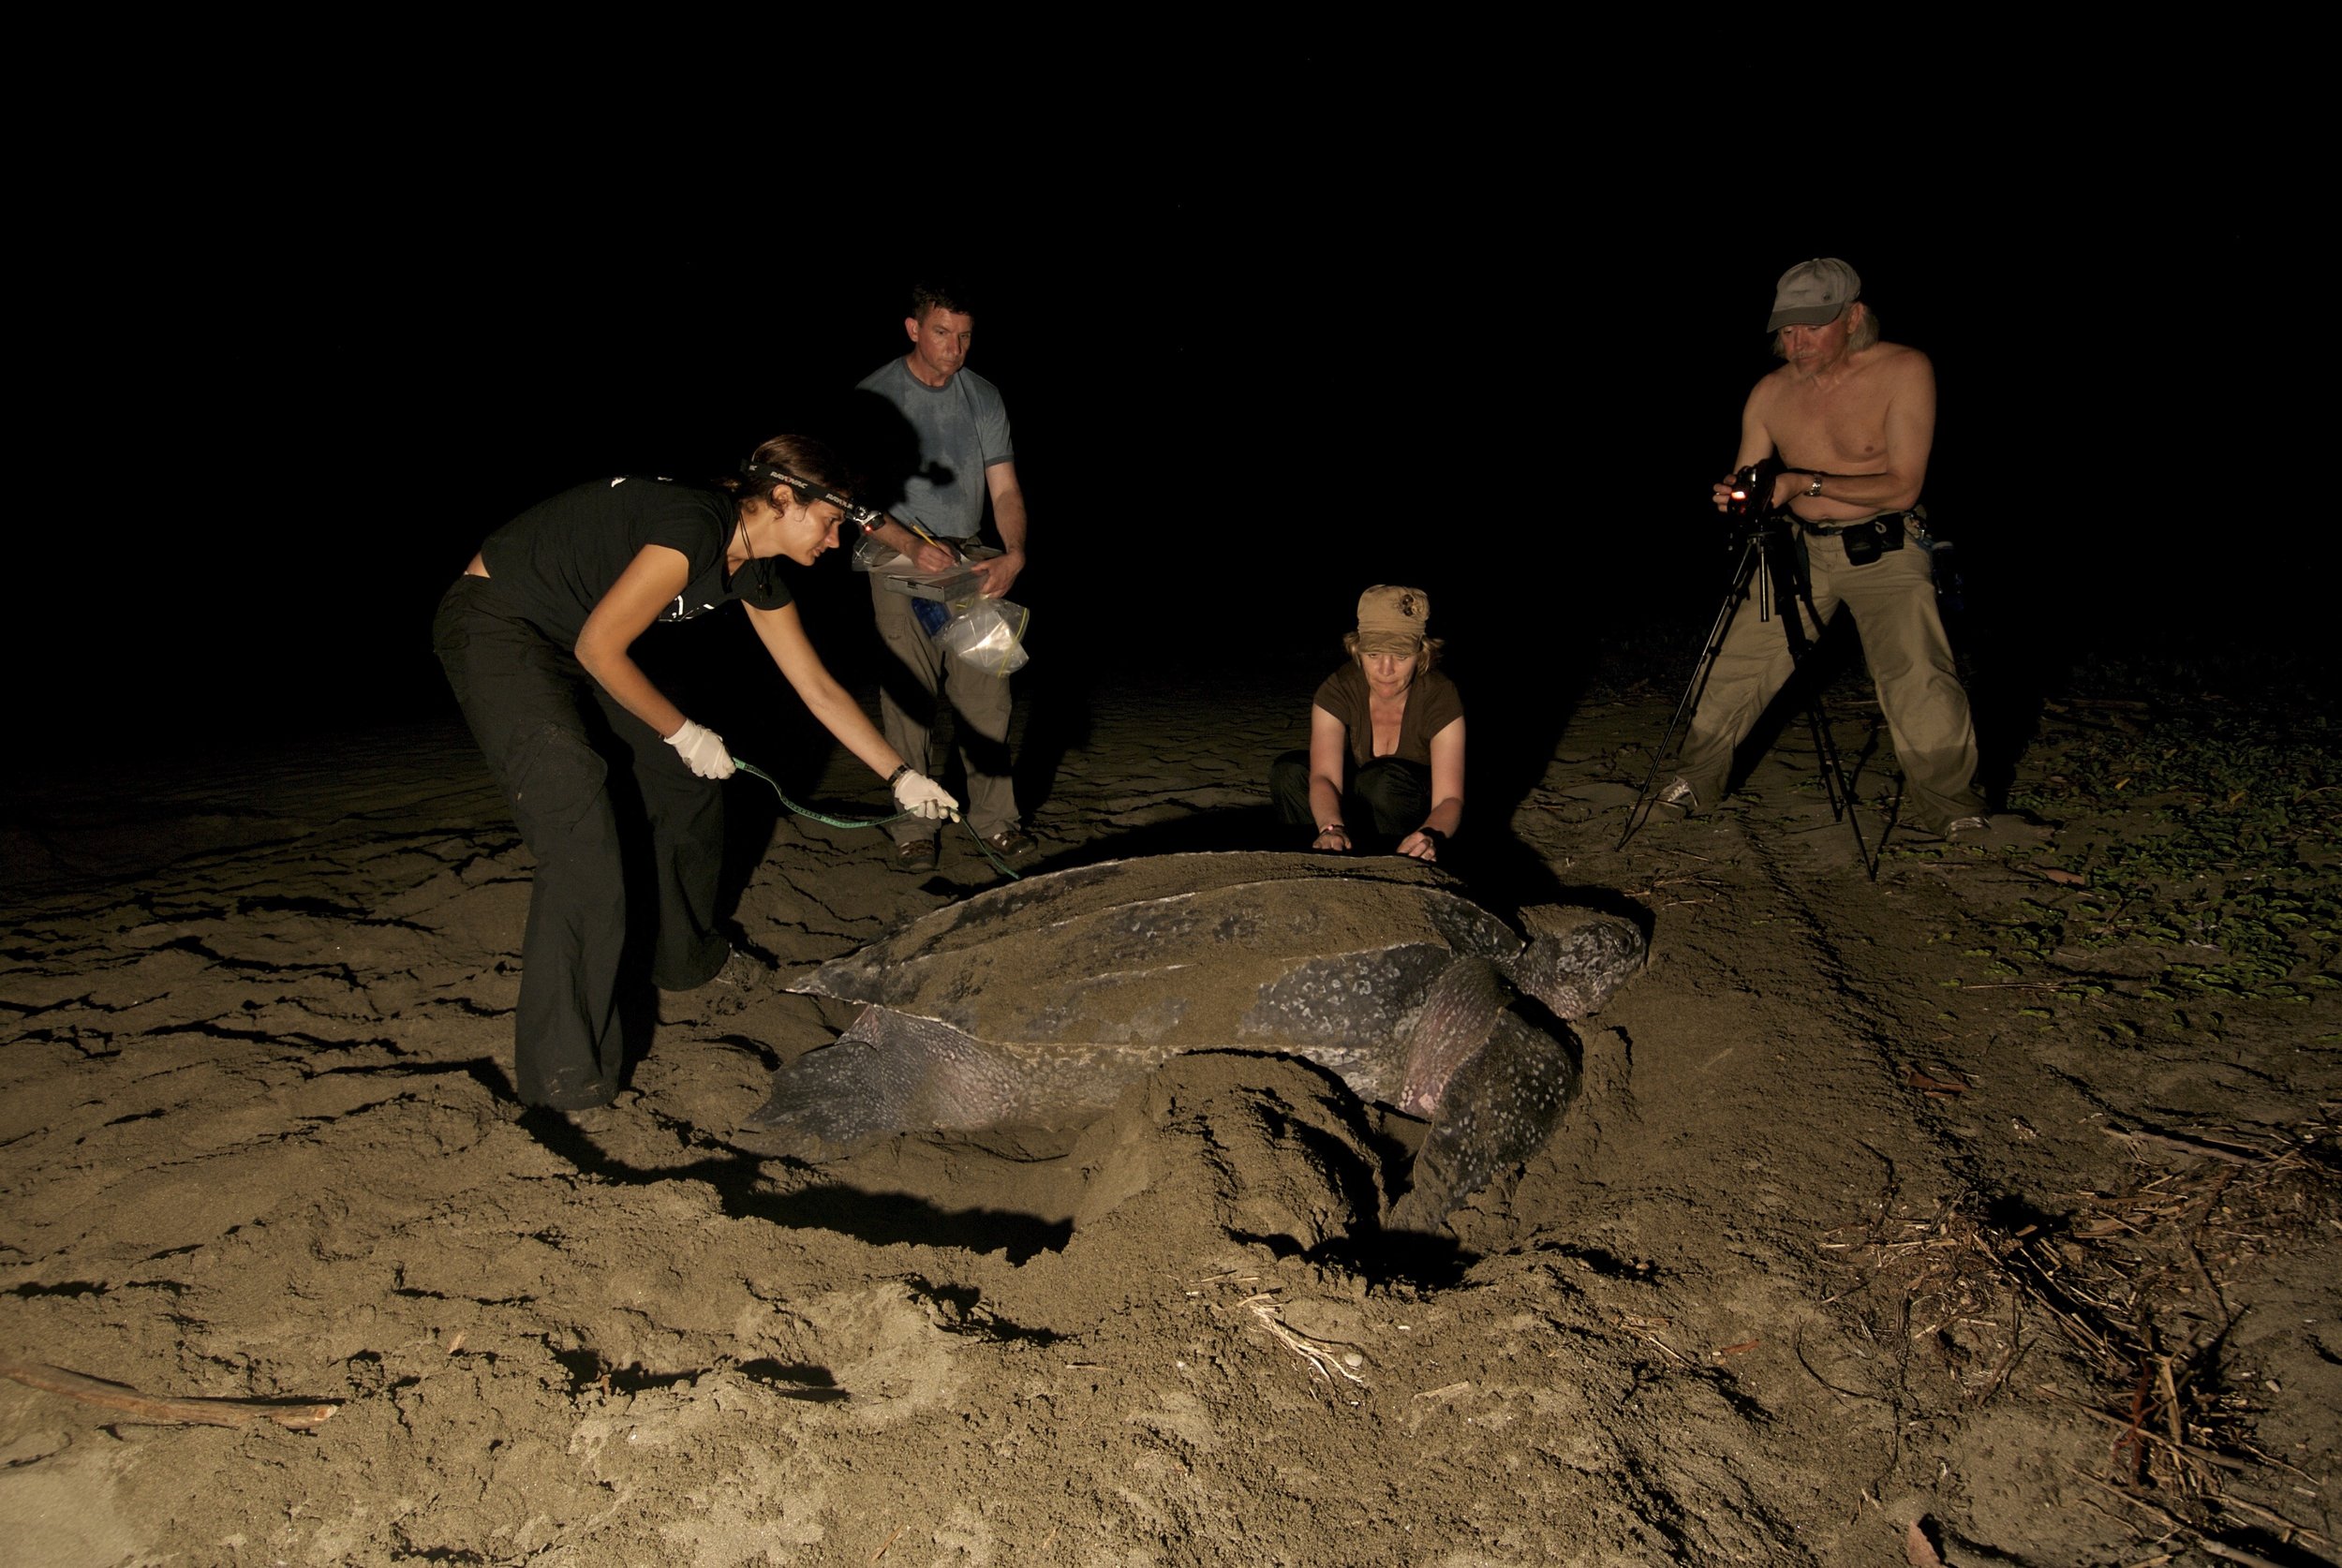 Night 2: First night patrol on the turtle nesting beach to look for leatherbacks.